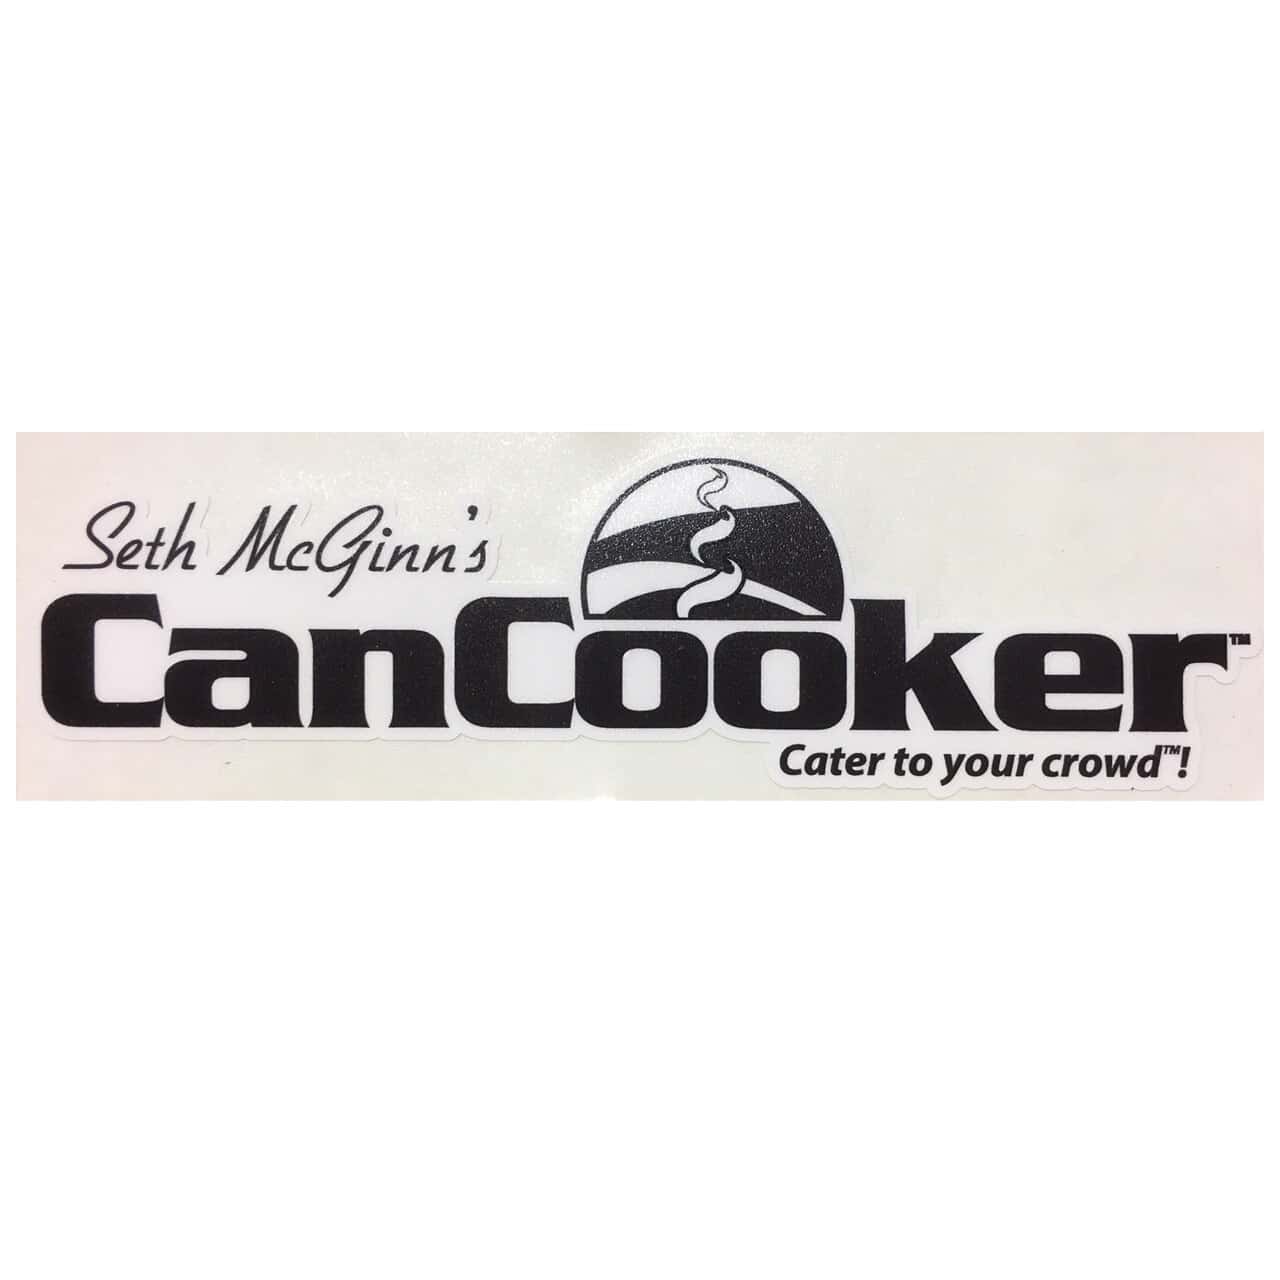 https://www.cancooker.com/wp-content/uploads/2020/03/products-cancooker-sticker__54801.1584711560.1280.1280.jpg